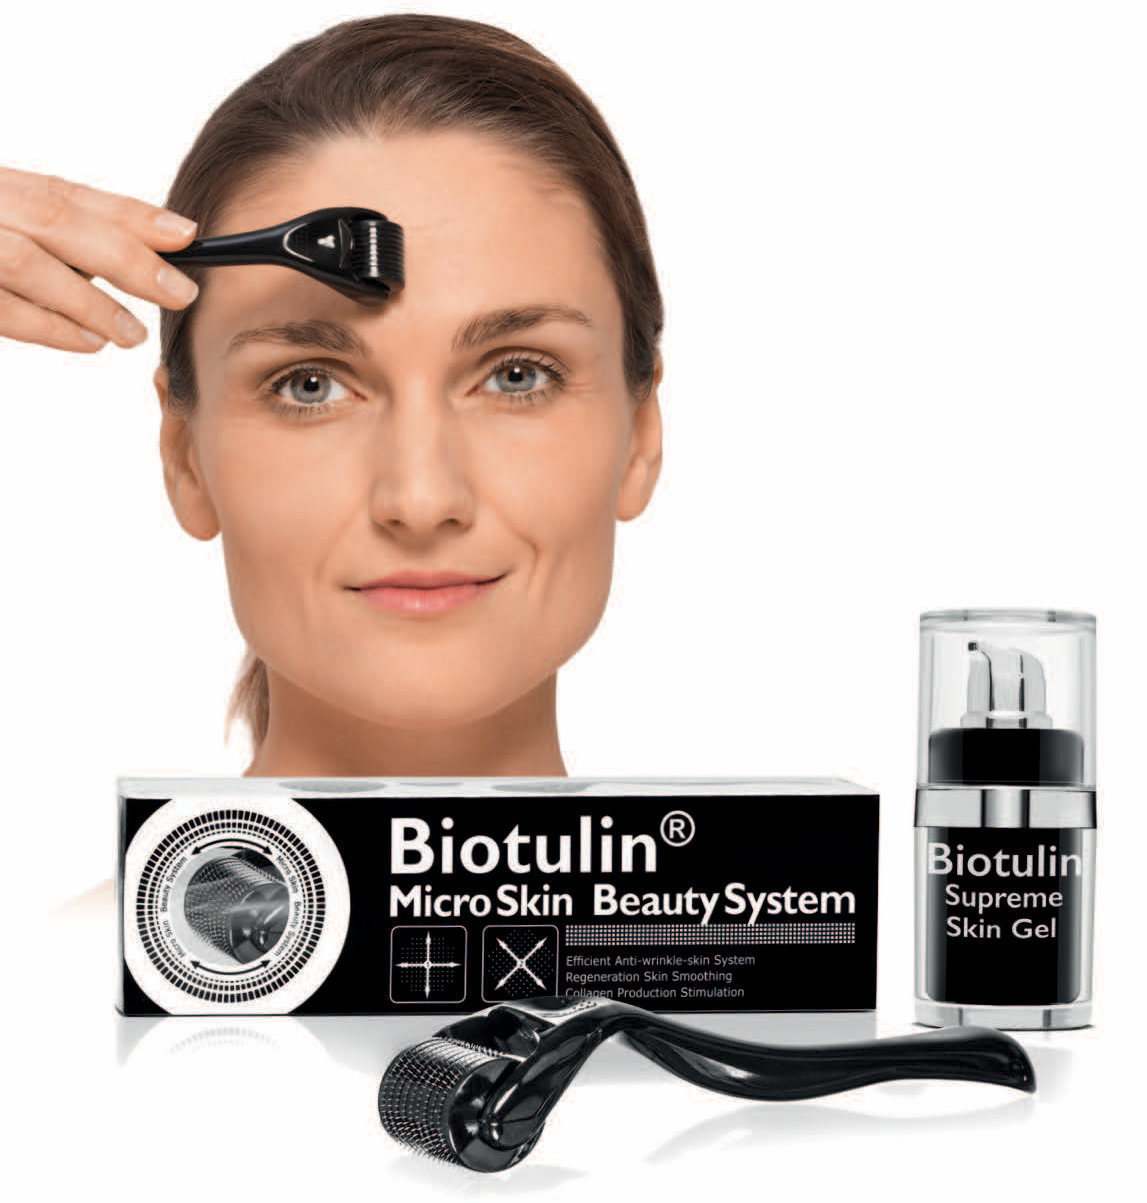 Biotulin Beauty System Removes Wrinkles - Anti-Aging System